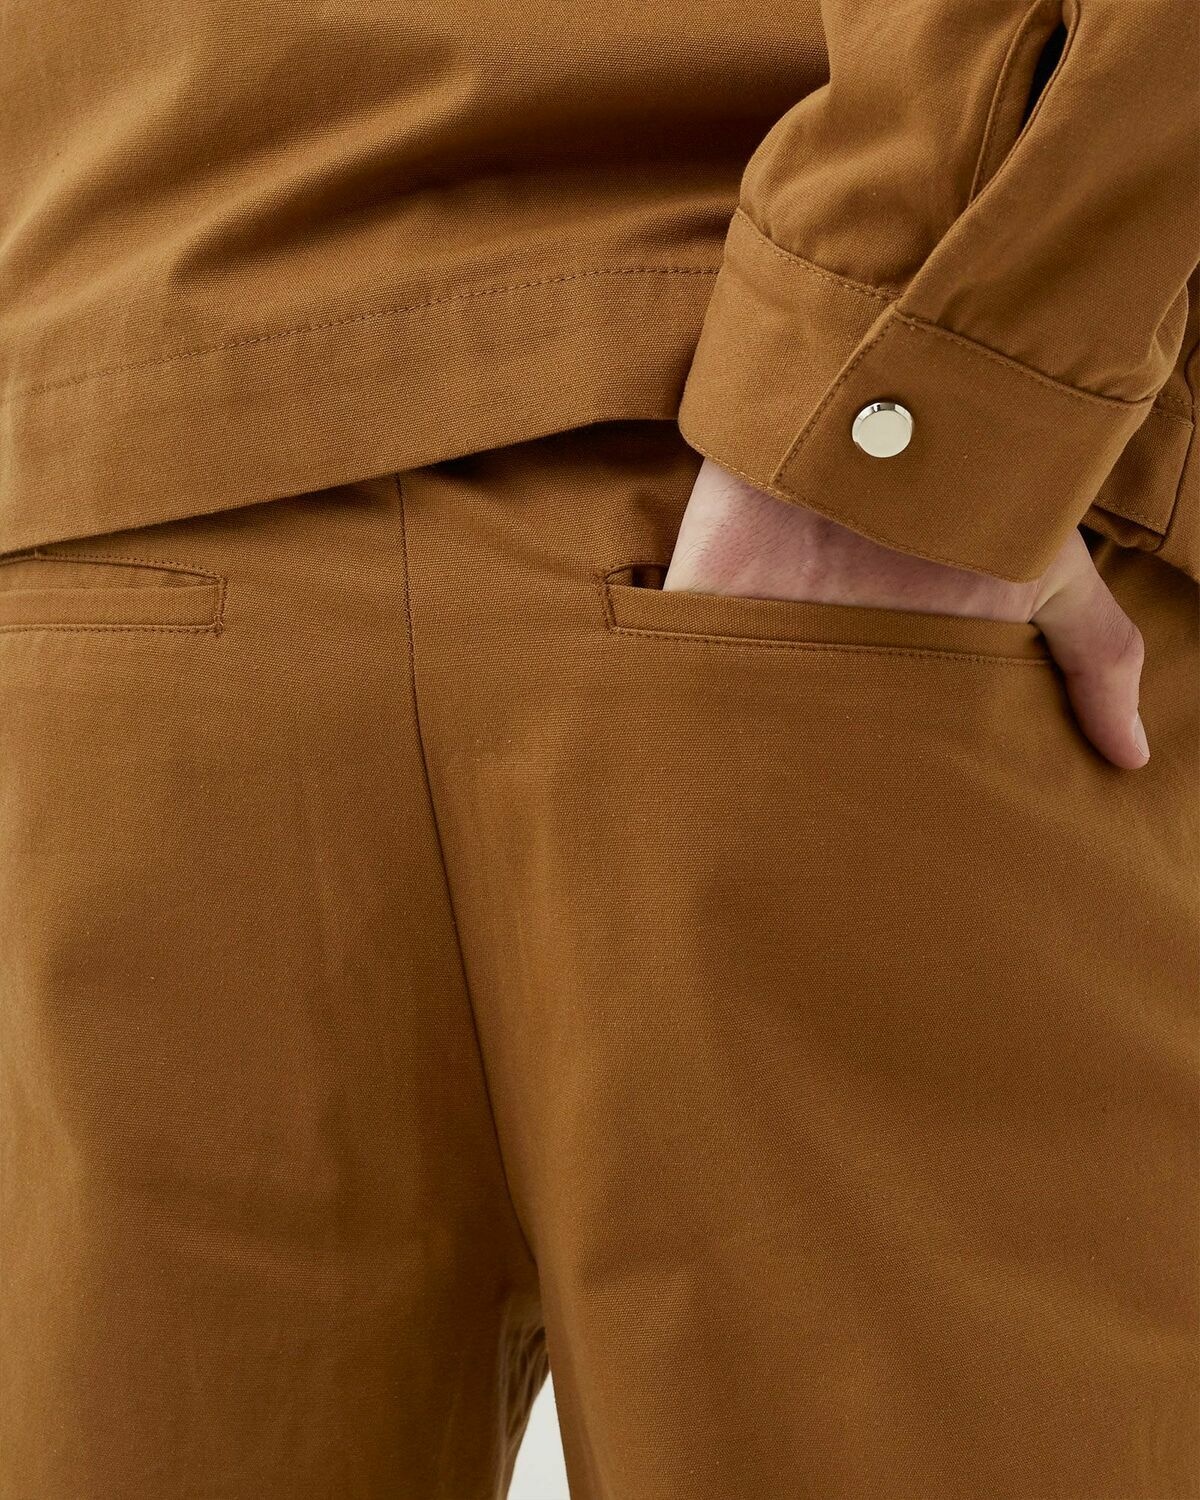 Bstn Brand Workwear Warm Up Pants Brown - Mens - Casual Pants